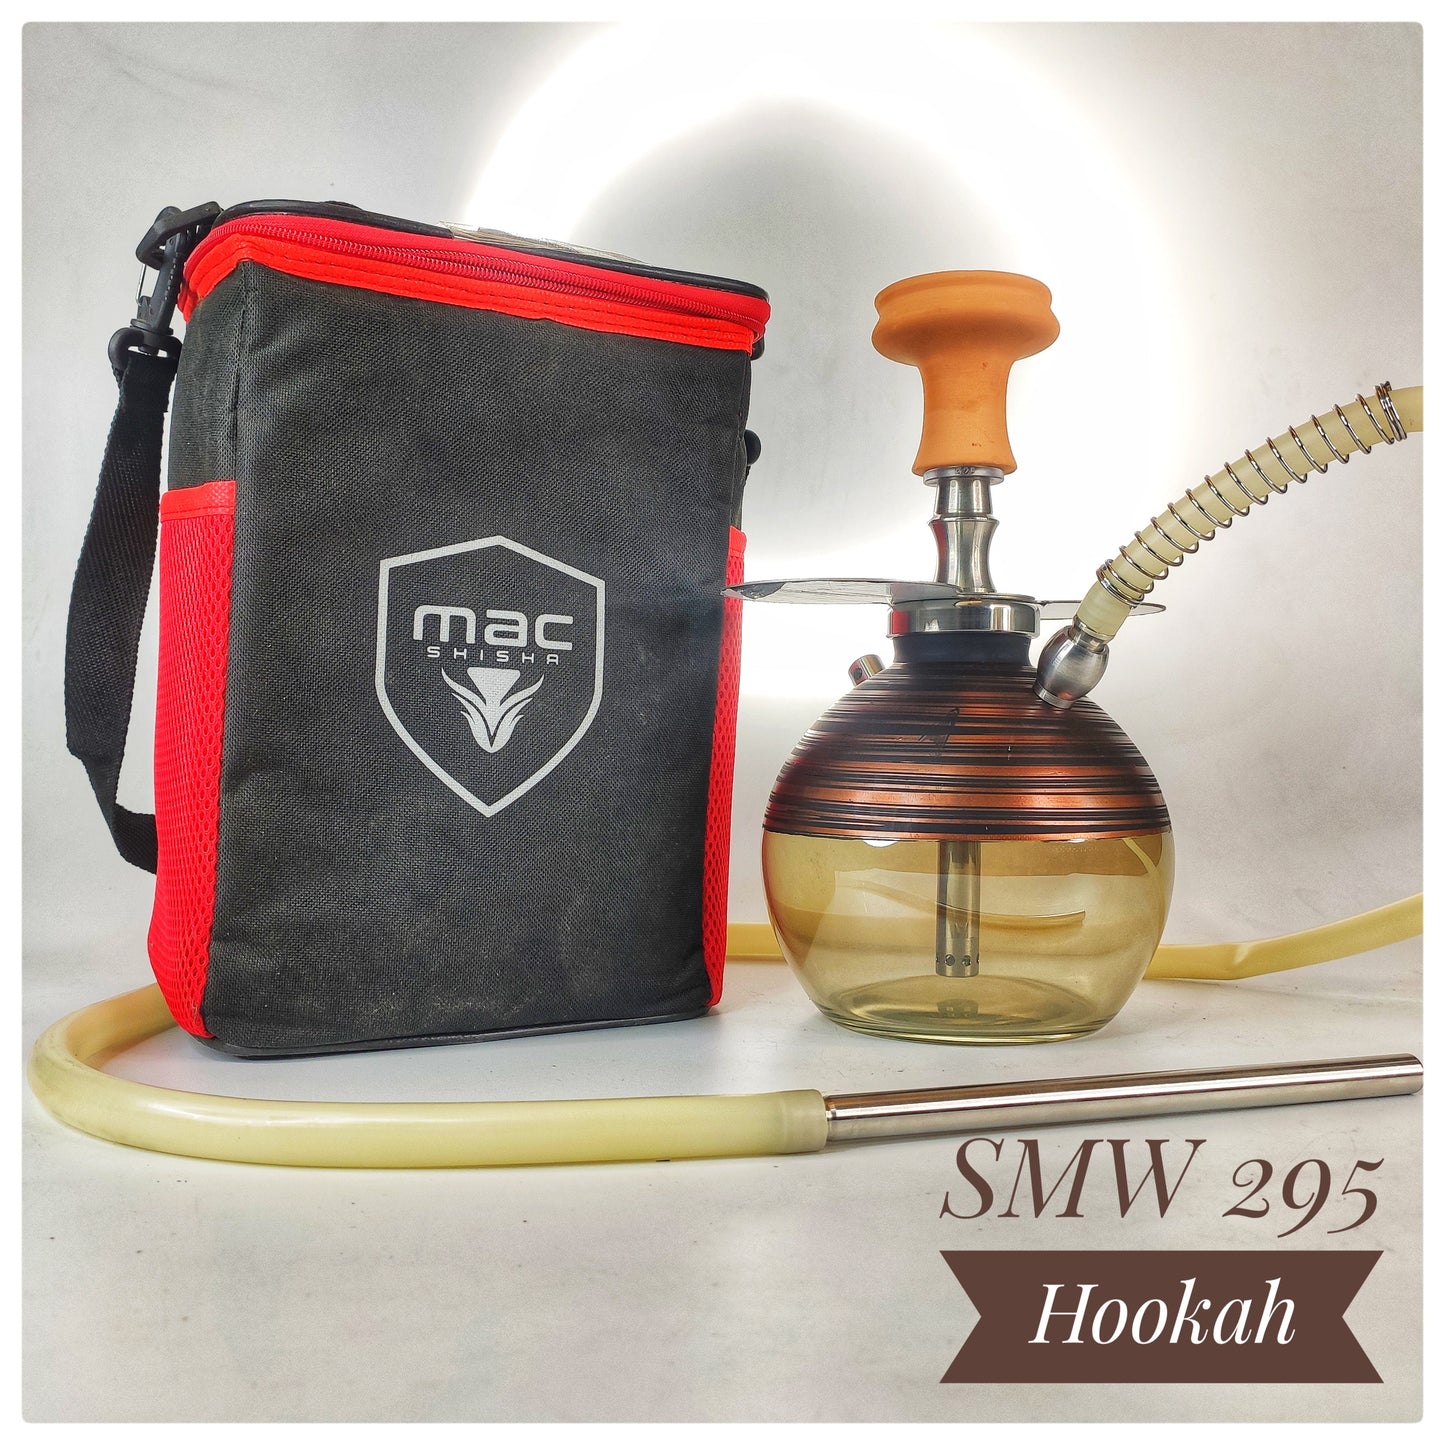 SMW 295 Hookah with Travel Bag